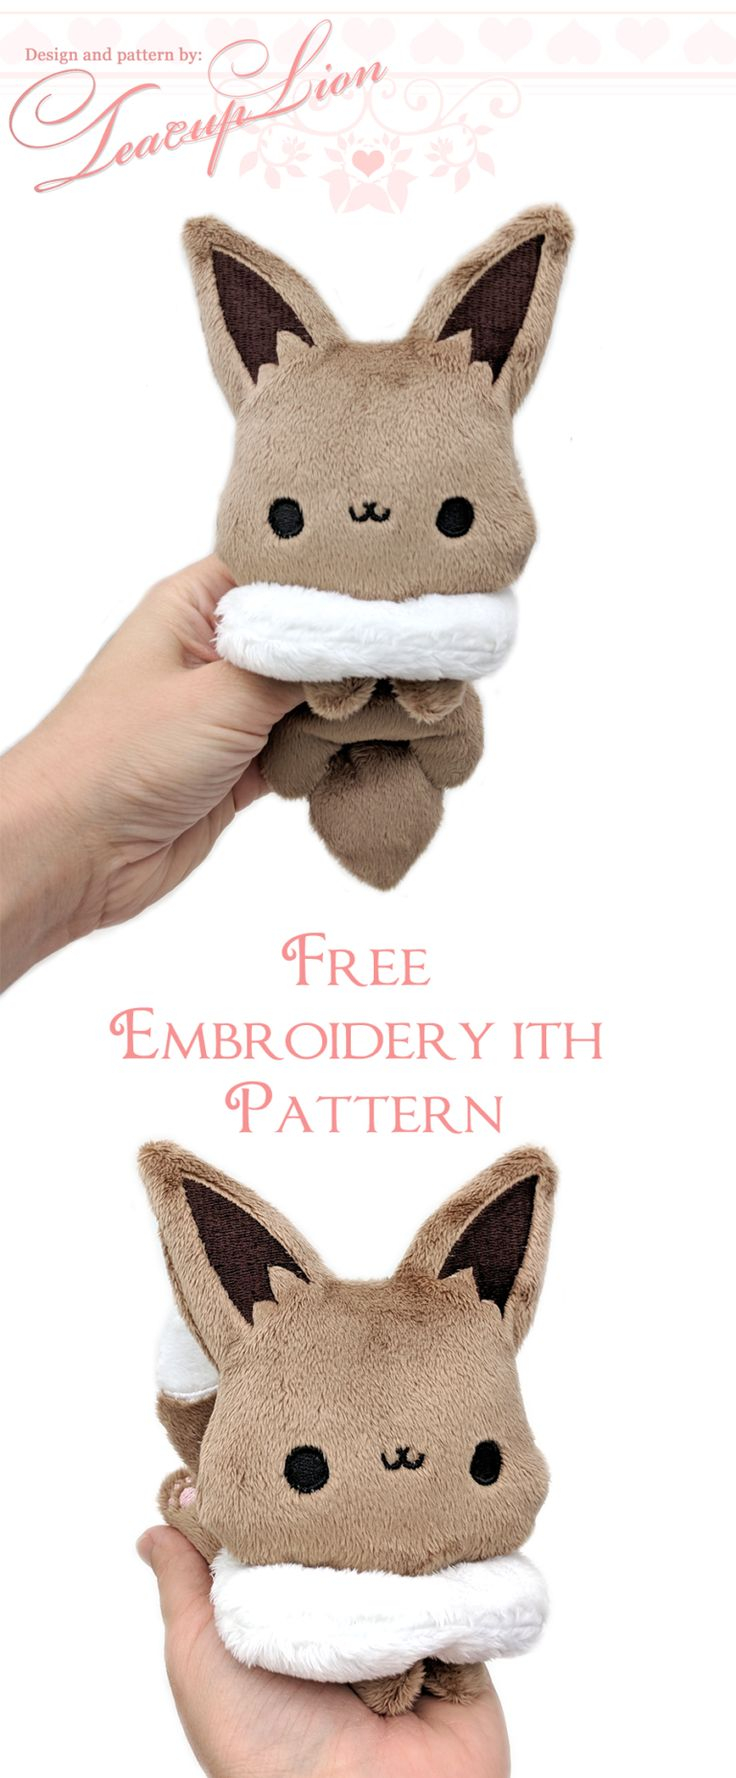 Free Machine Embroidery Patterns Knitting Patterns Christmas Free Eevee Plushie Sewing Pattern And